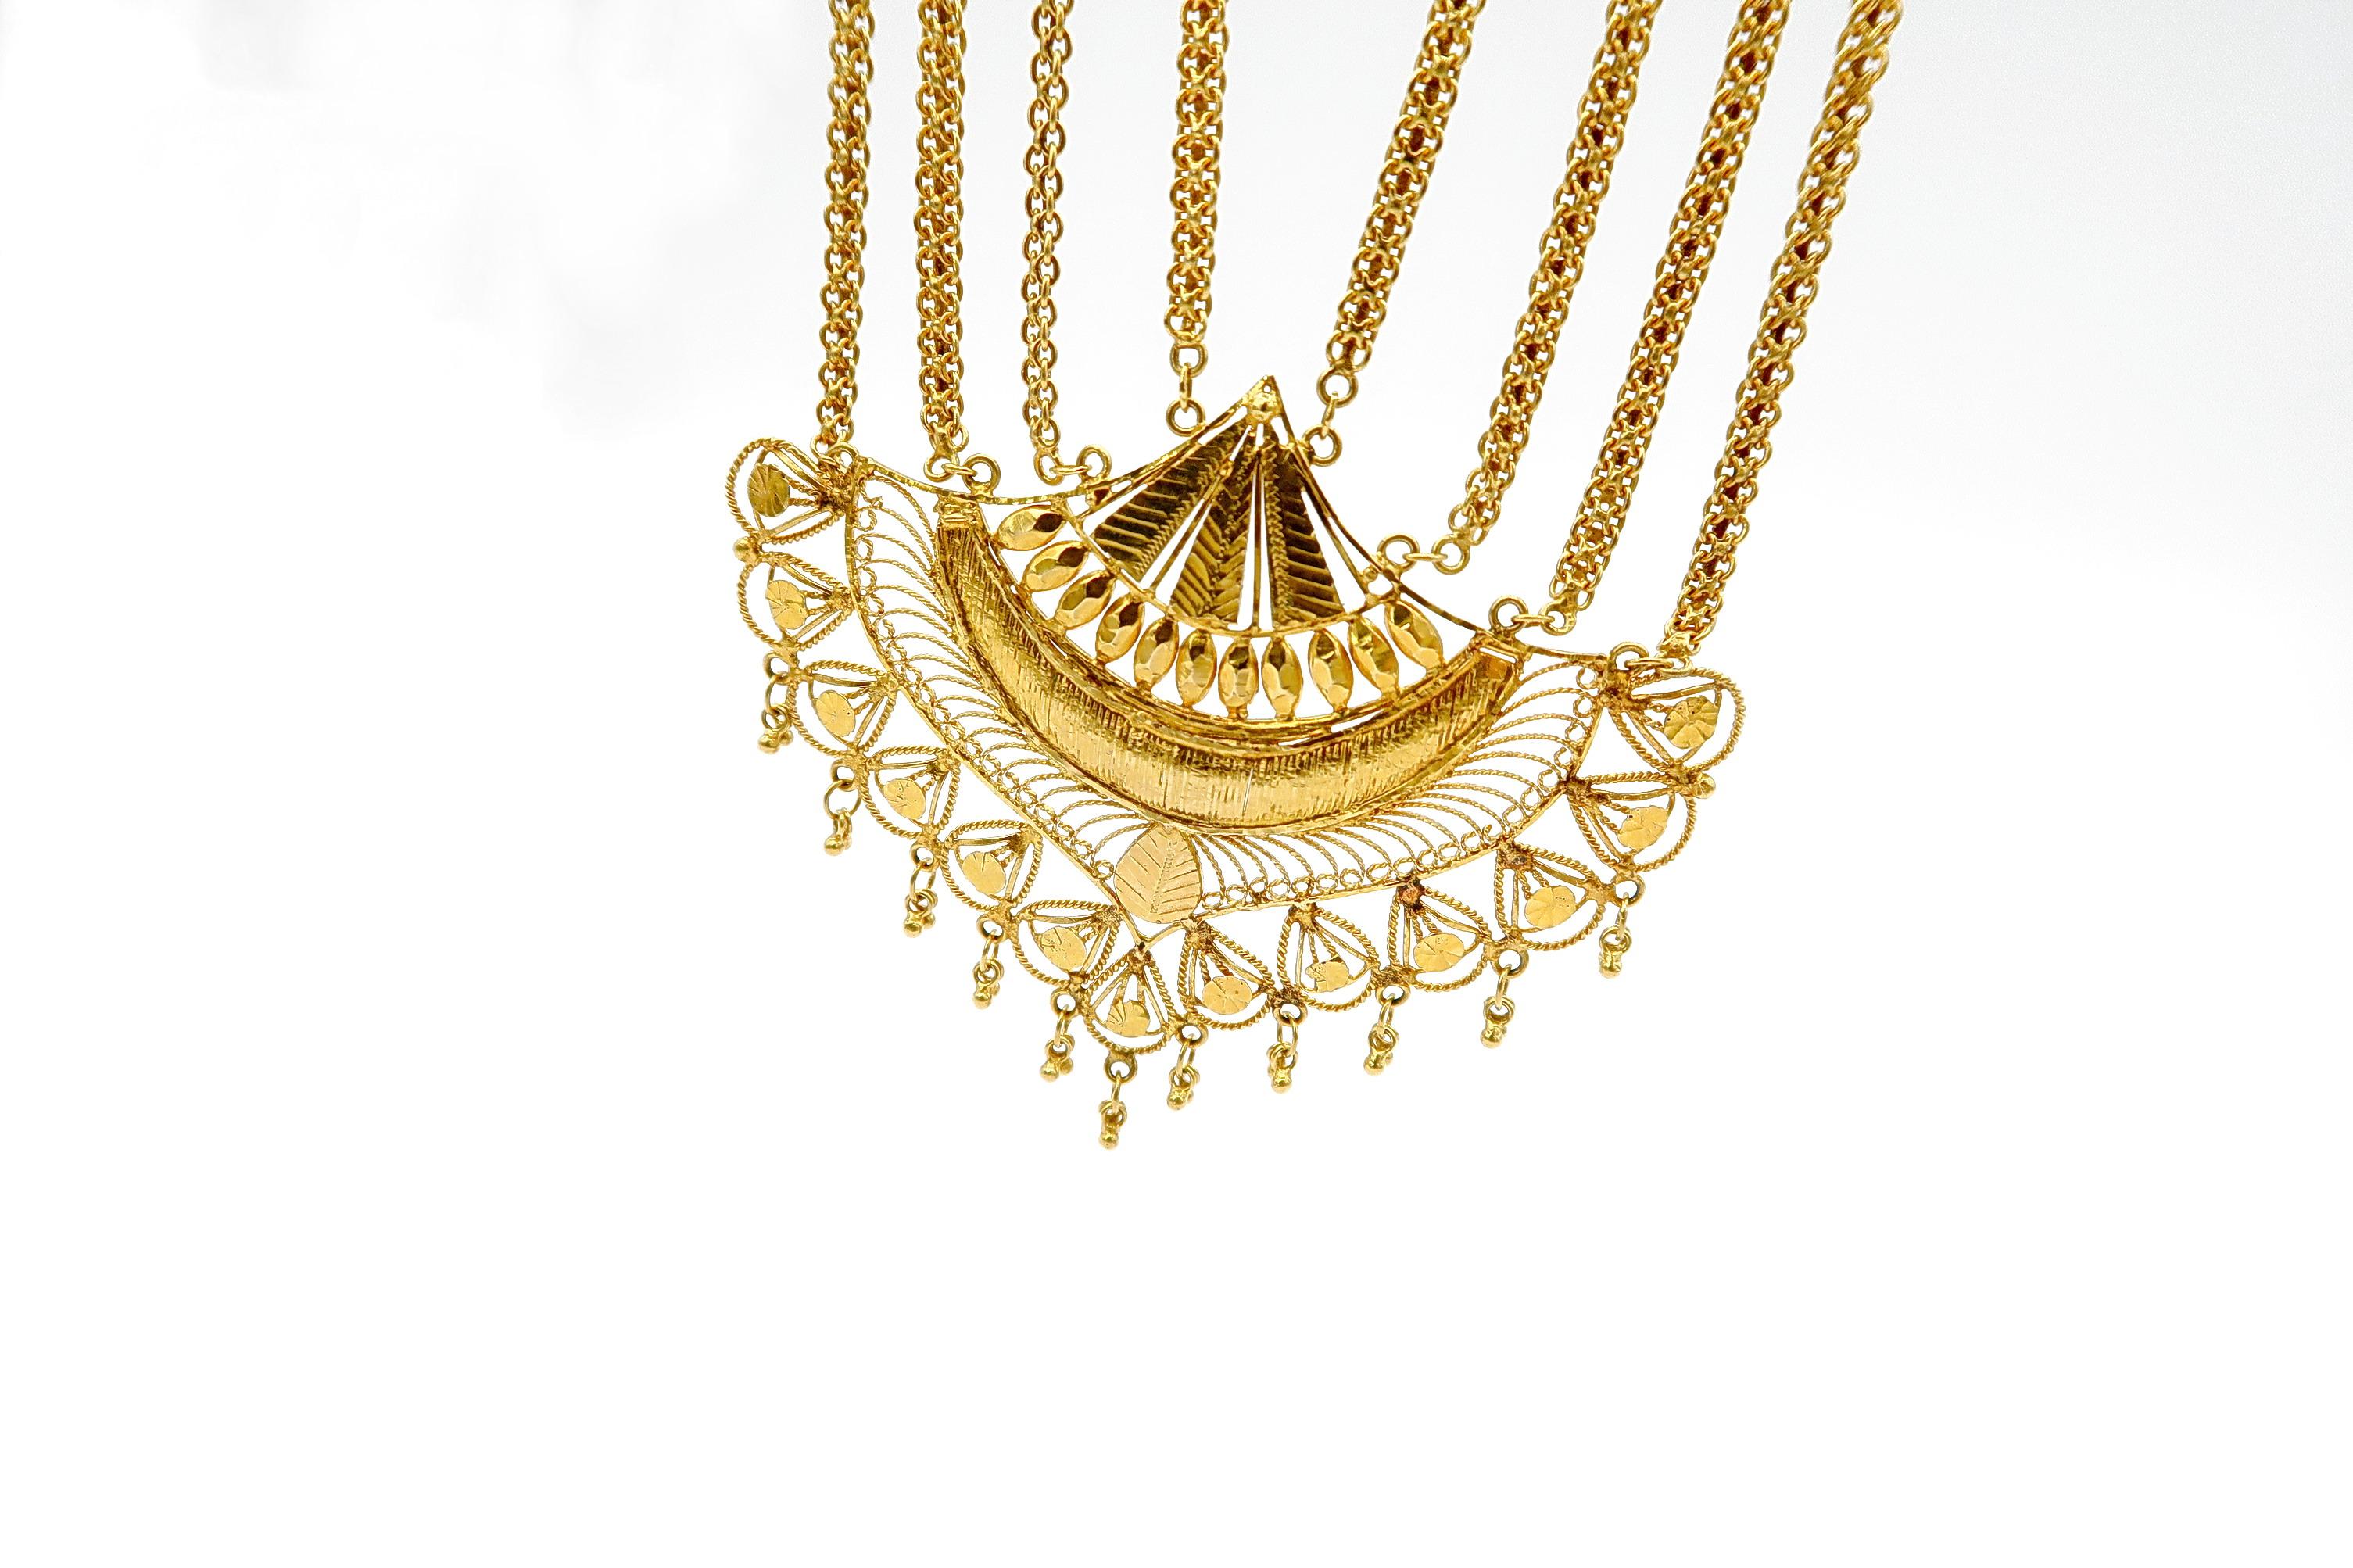 Faceted Engraved 22K Gold pieces meticulously linked together with chains of multiple lengths into this princess-length layered chandelier necklace.

Gold: 22K Gold, approx. 30 g

The necklace comes with a gift box.